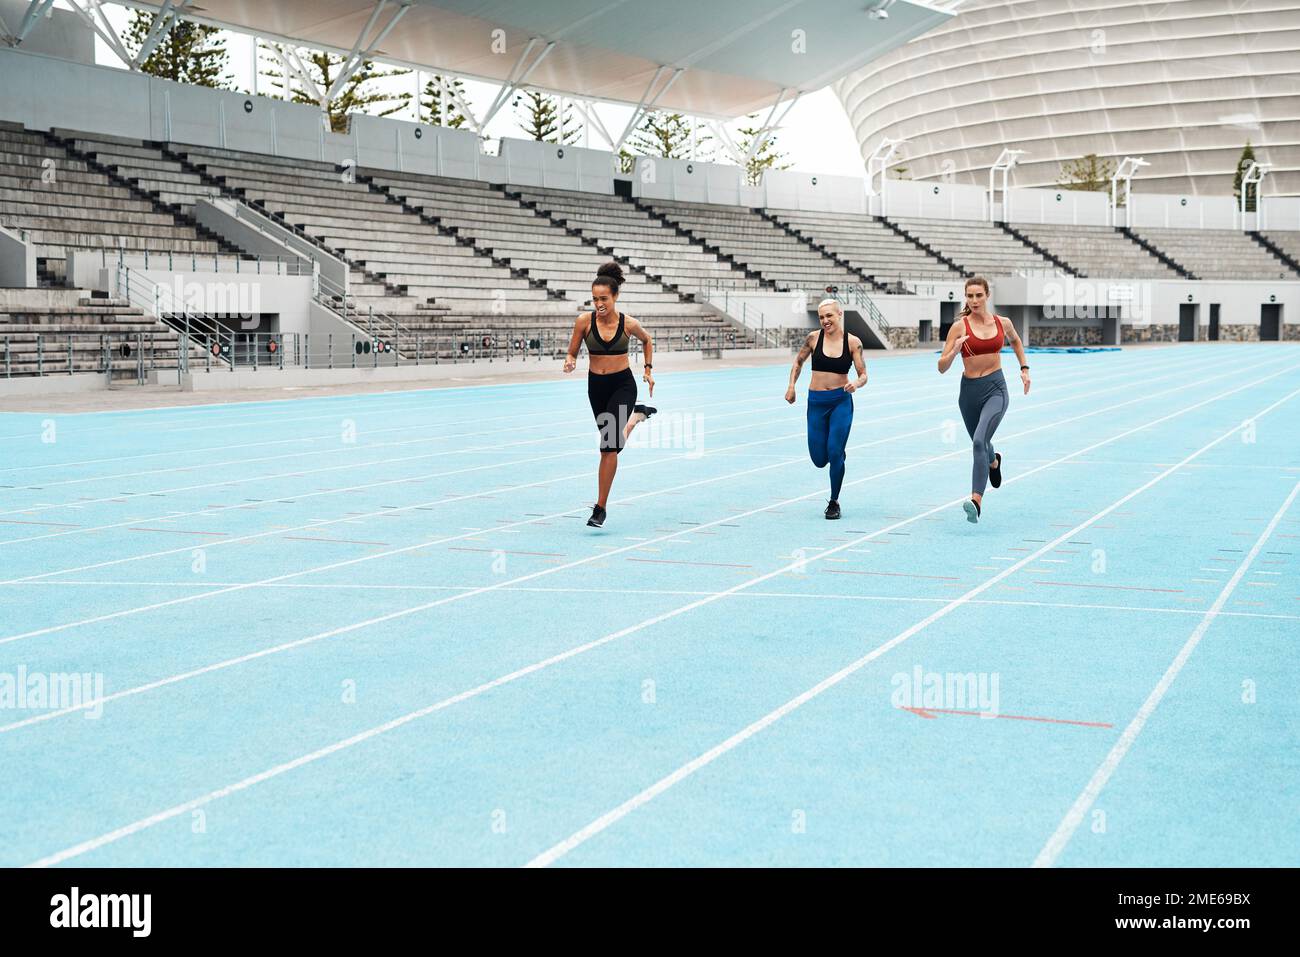 We keep each other on our toes. Full length shot of a young attractive group of athletes racing each other during a track and field workout session. Stock Photo